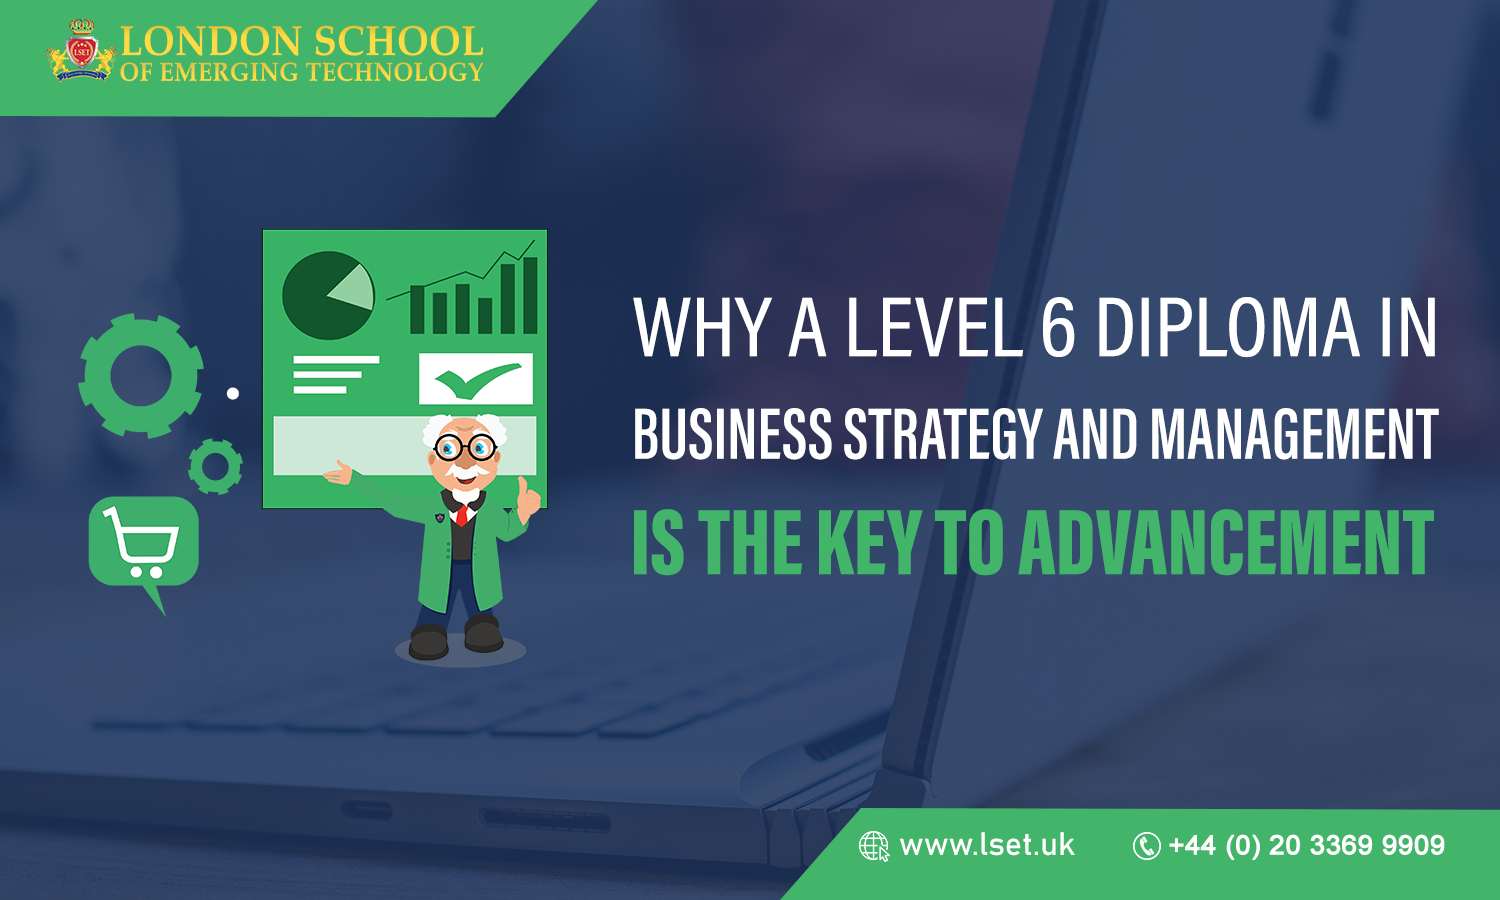 Why a Level 6 Diploma in Business Strategy and Management is the Key to Advancement